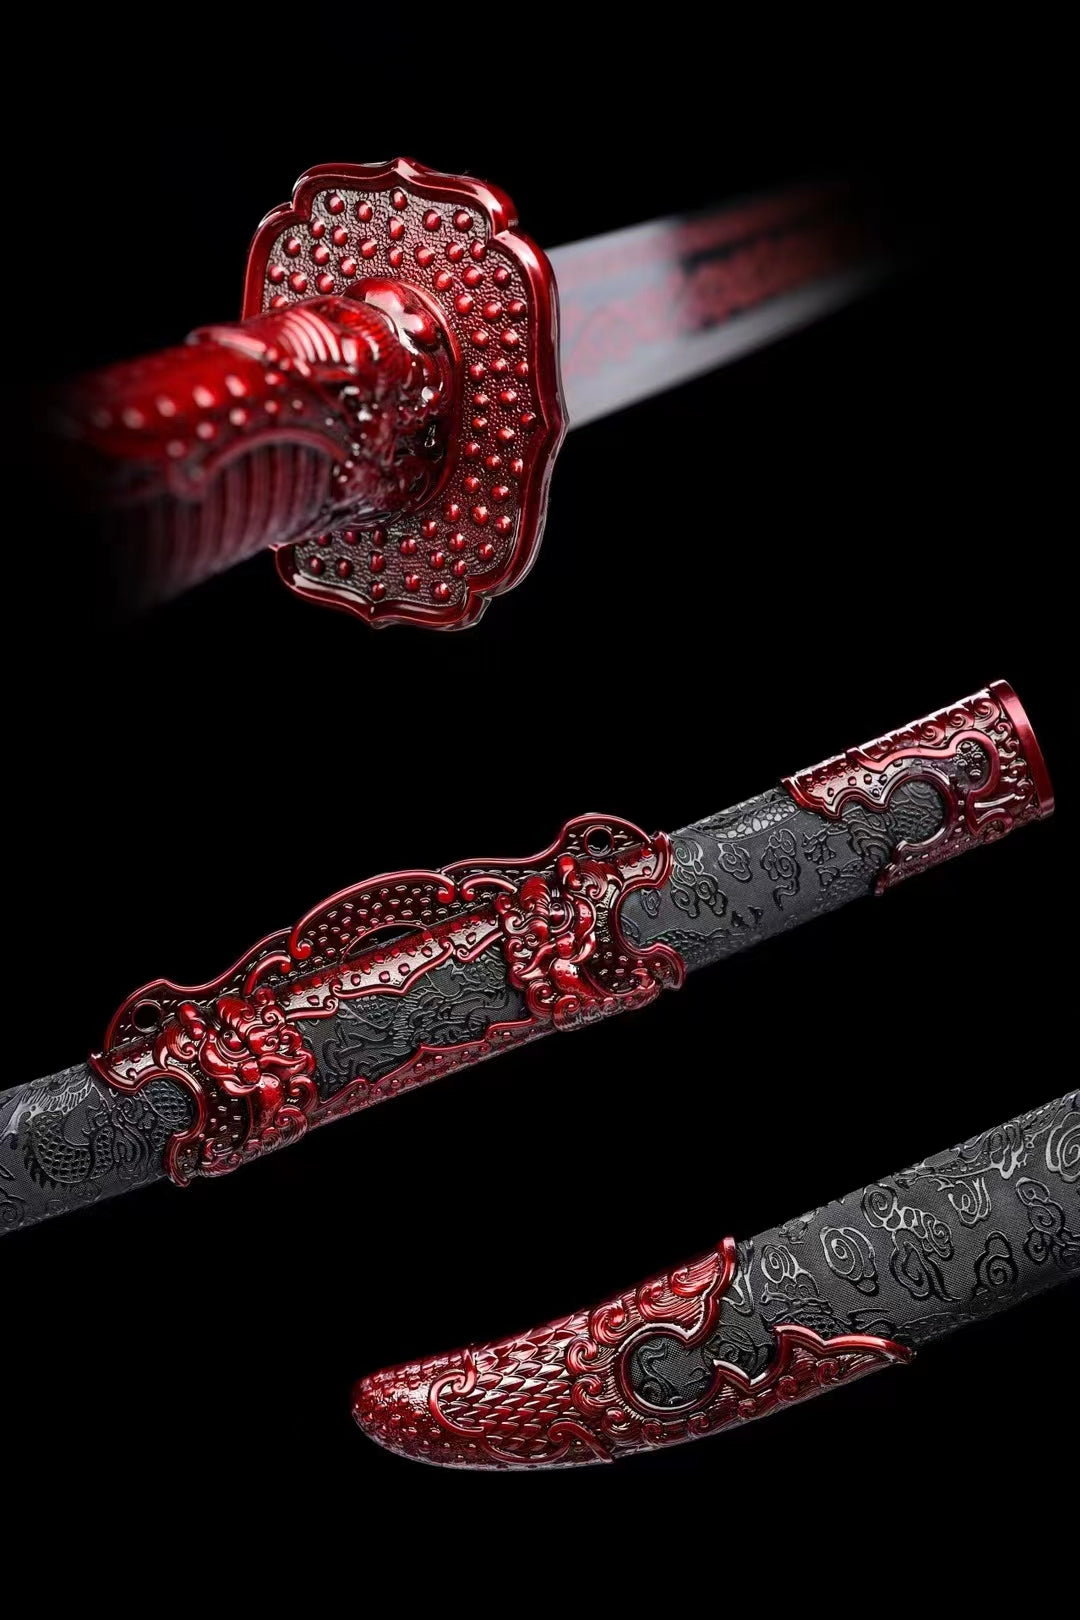 Forged from manganese steel, black and red high temperature paint绣春刀-赤血